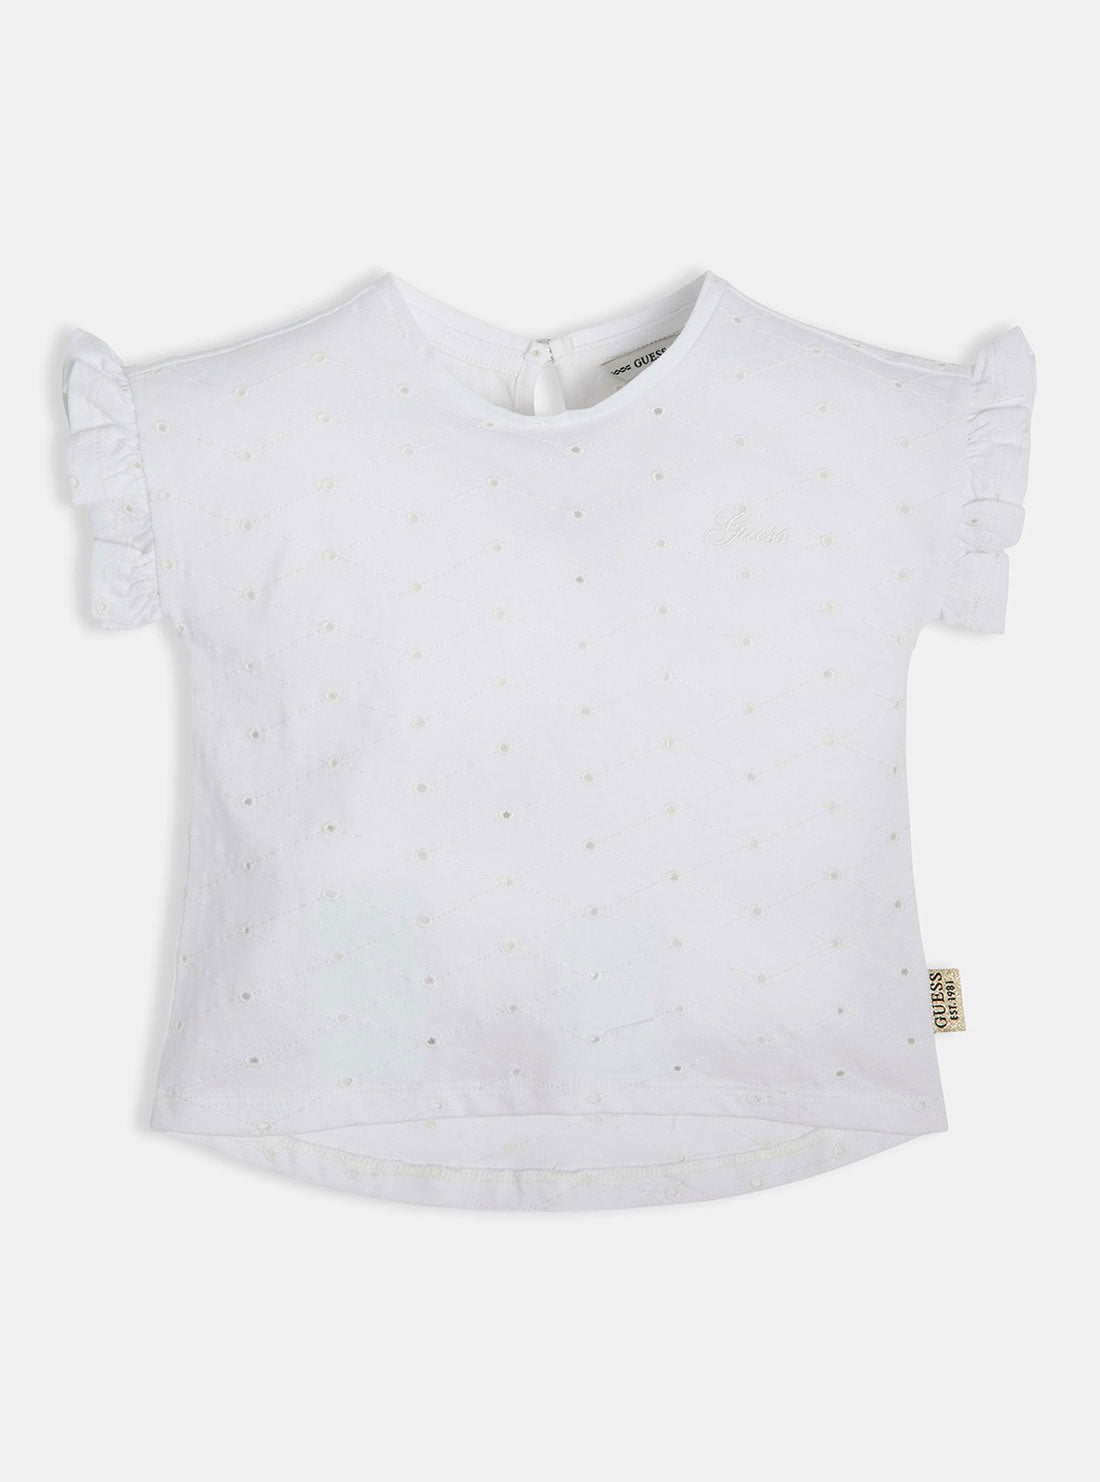 White Sangallo Embroidered Top | GUESS Kids | Front view